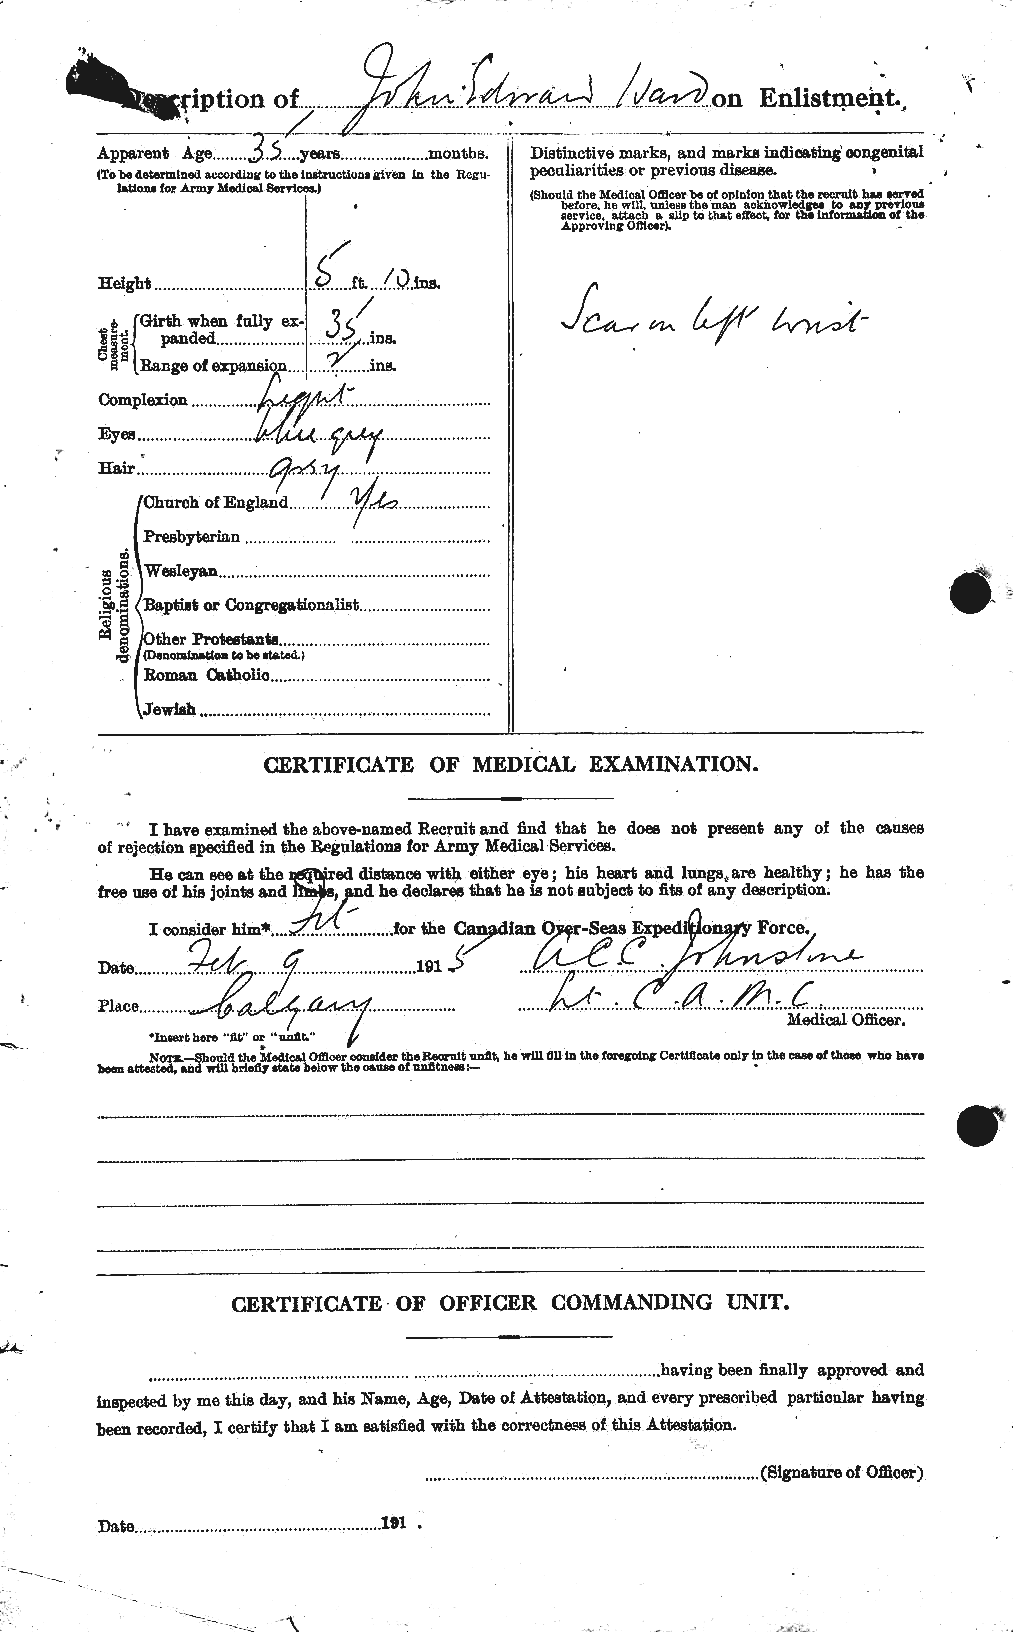 Personnel Records of the First World War - CEF 659517b